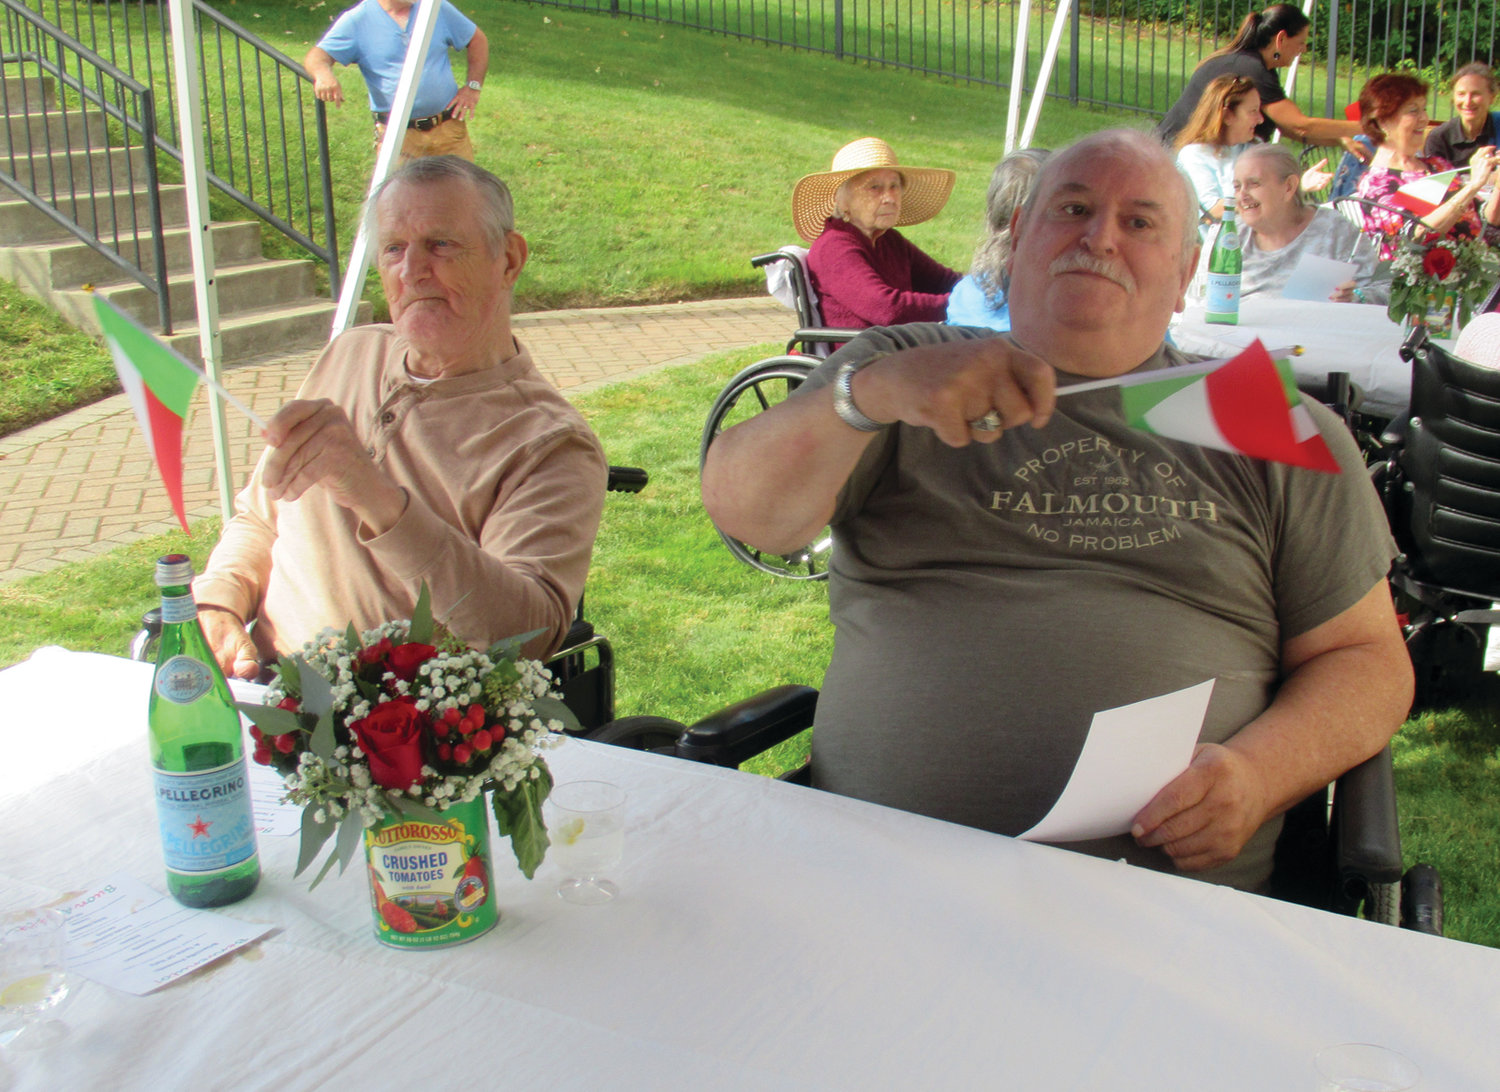 FLAG FUN: These Briarcliffe Manor residents raised – and waved – small Italian flags that were all part of Tuesday’s fun and food-filled Taste of Italy. 